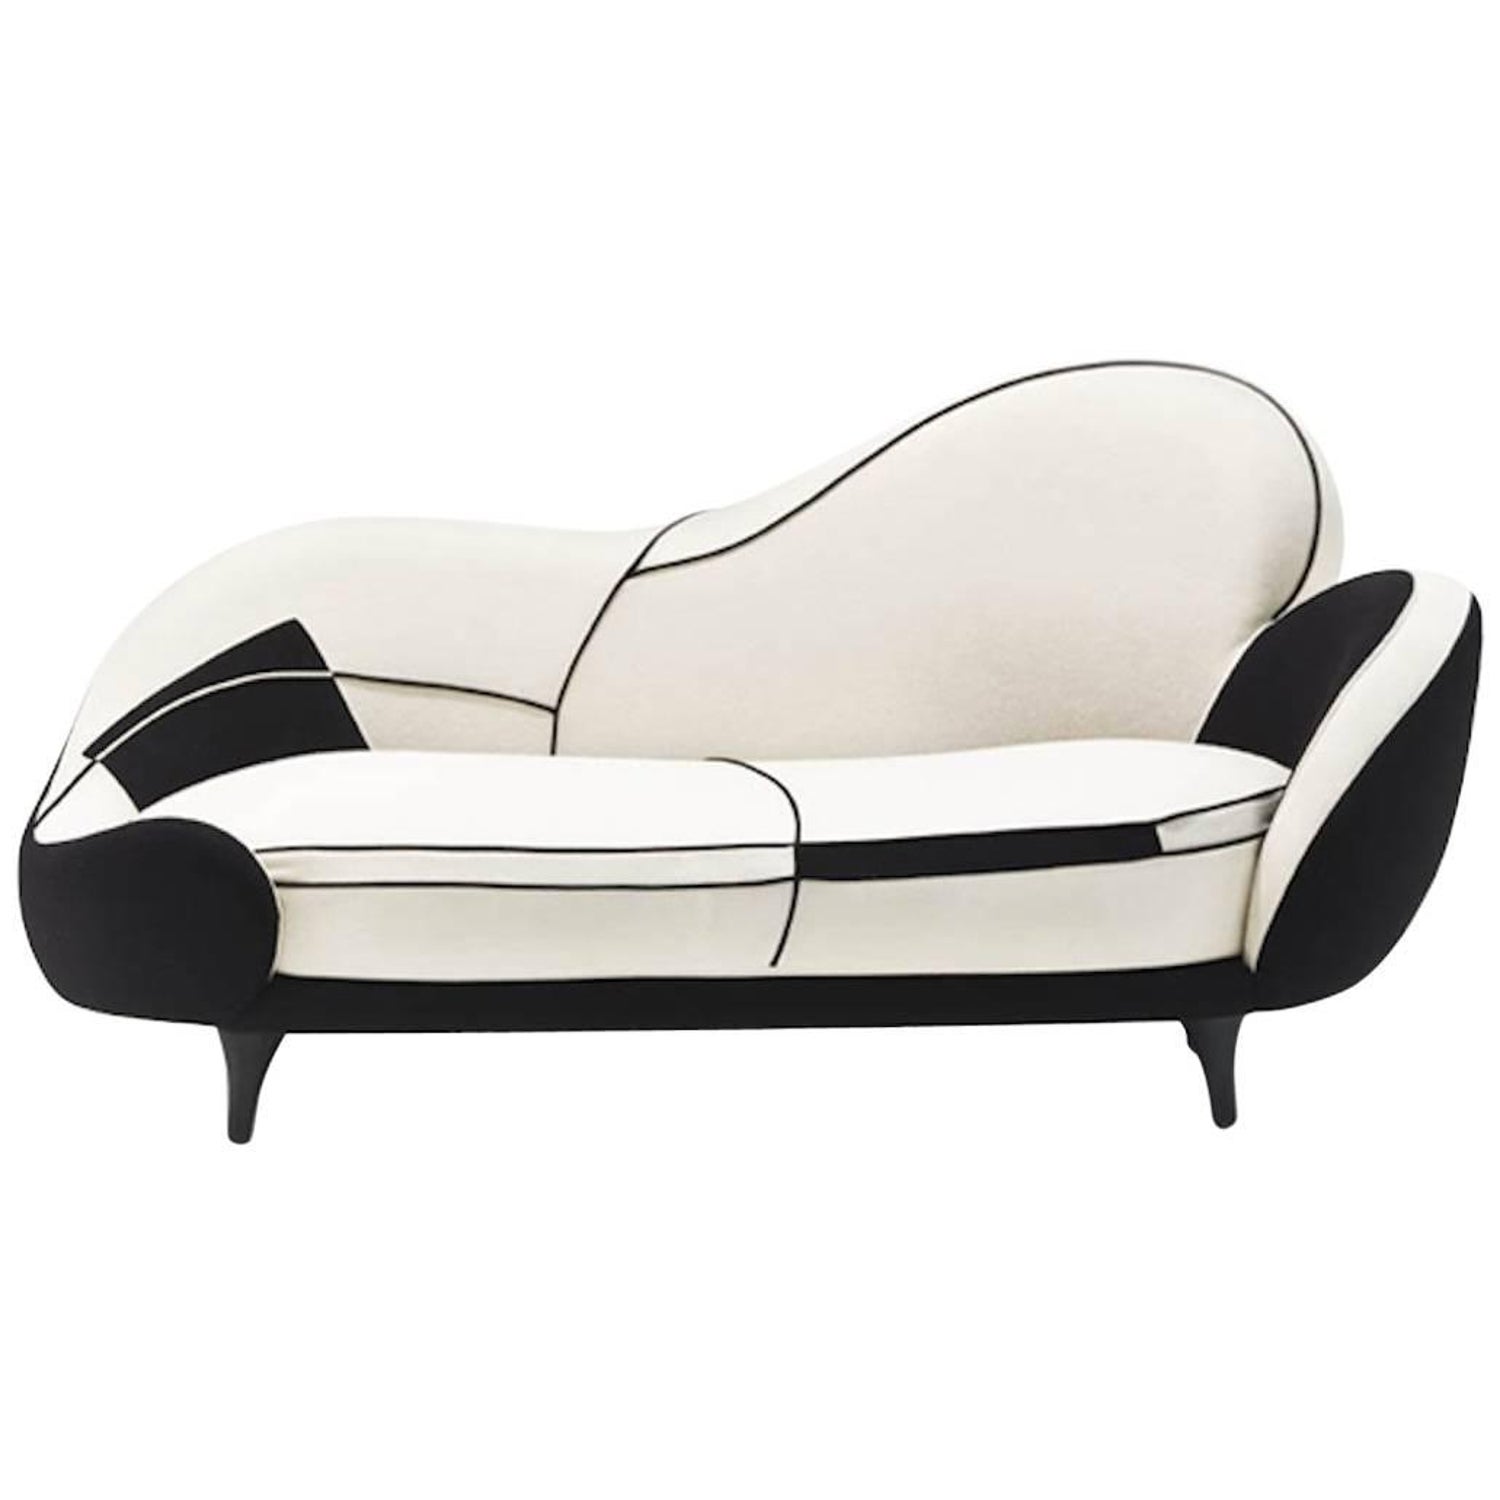 Saula Marina Sofa by Javier Mariscal in Black and White Fabric or Leather  For Sale at 1stDibs